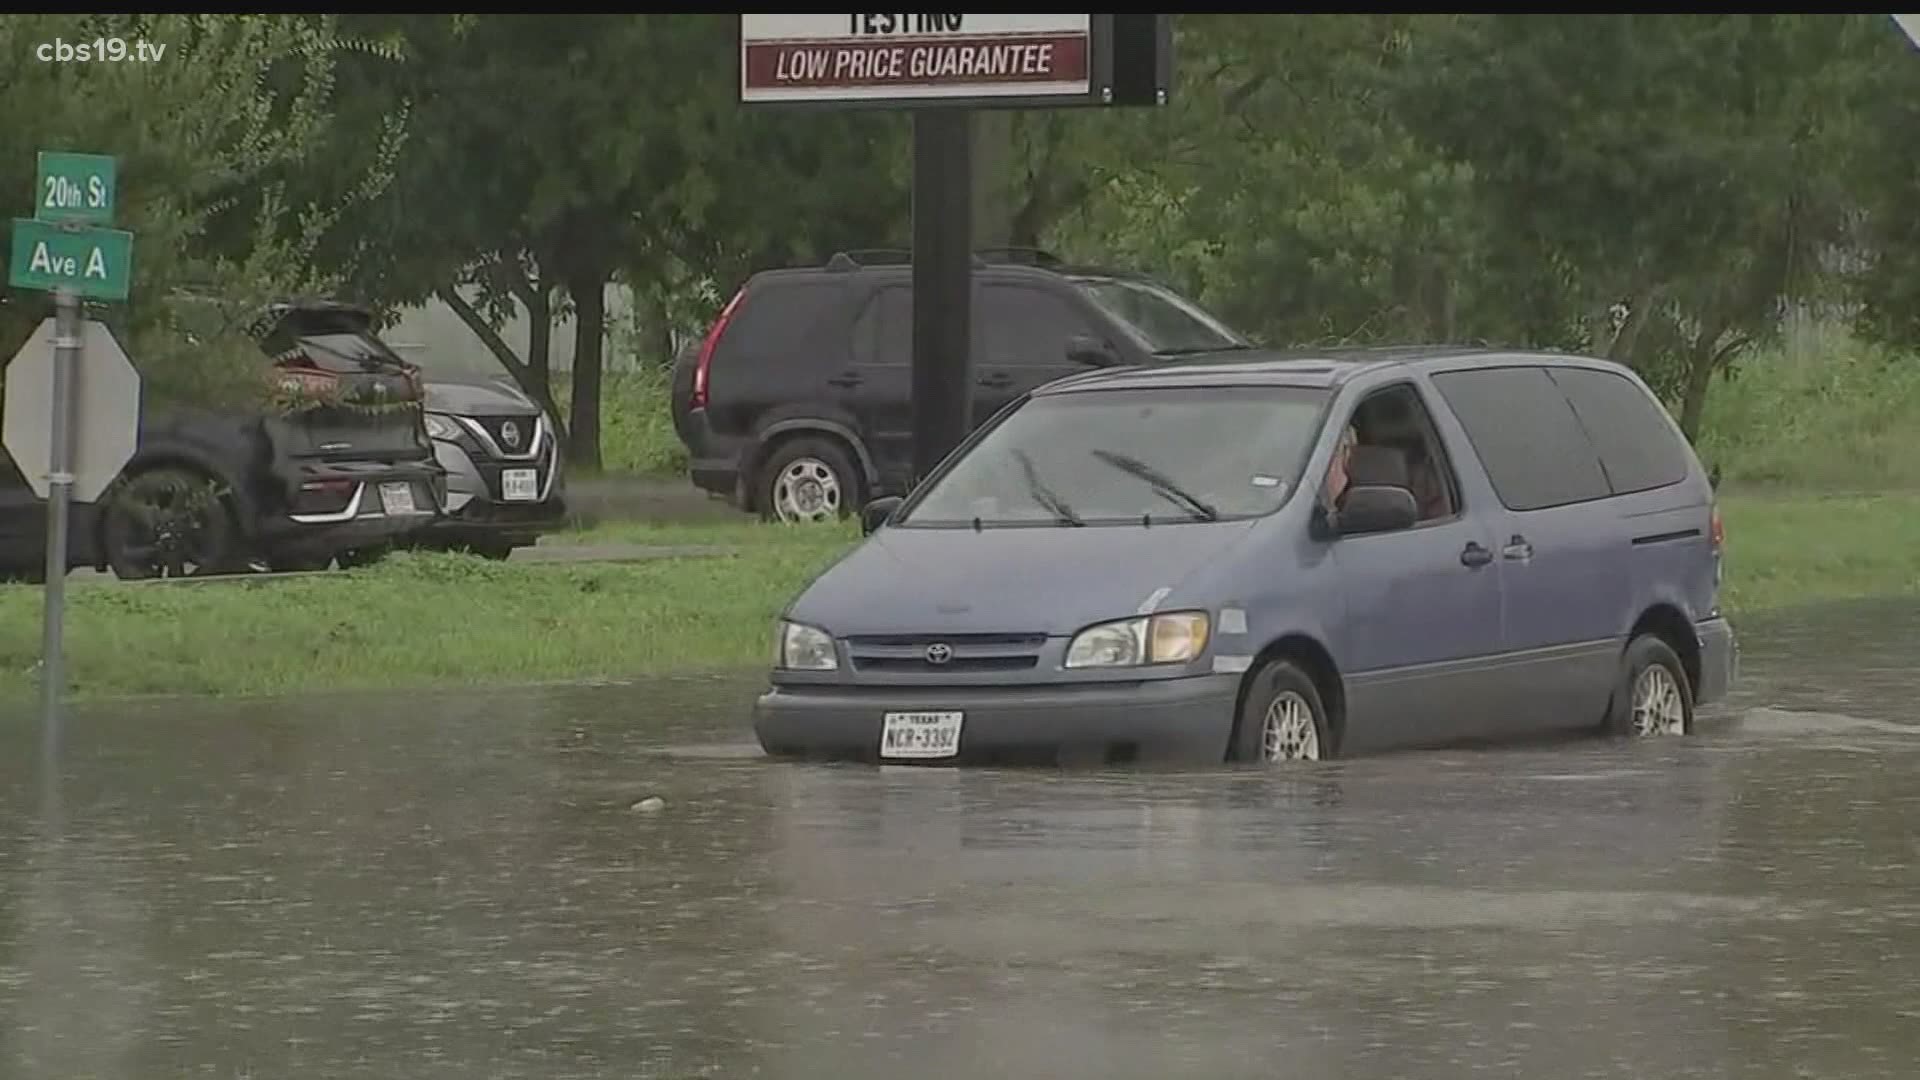 FEMA reports it only takes 6 inches of water to sweep your car away.